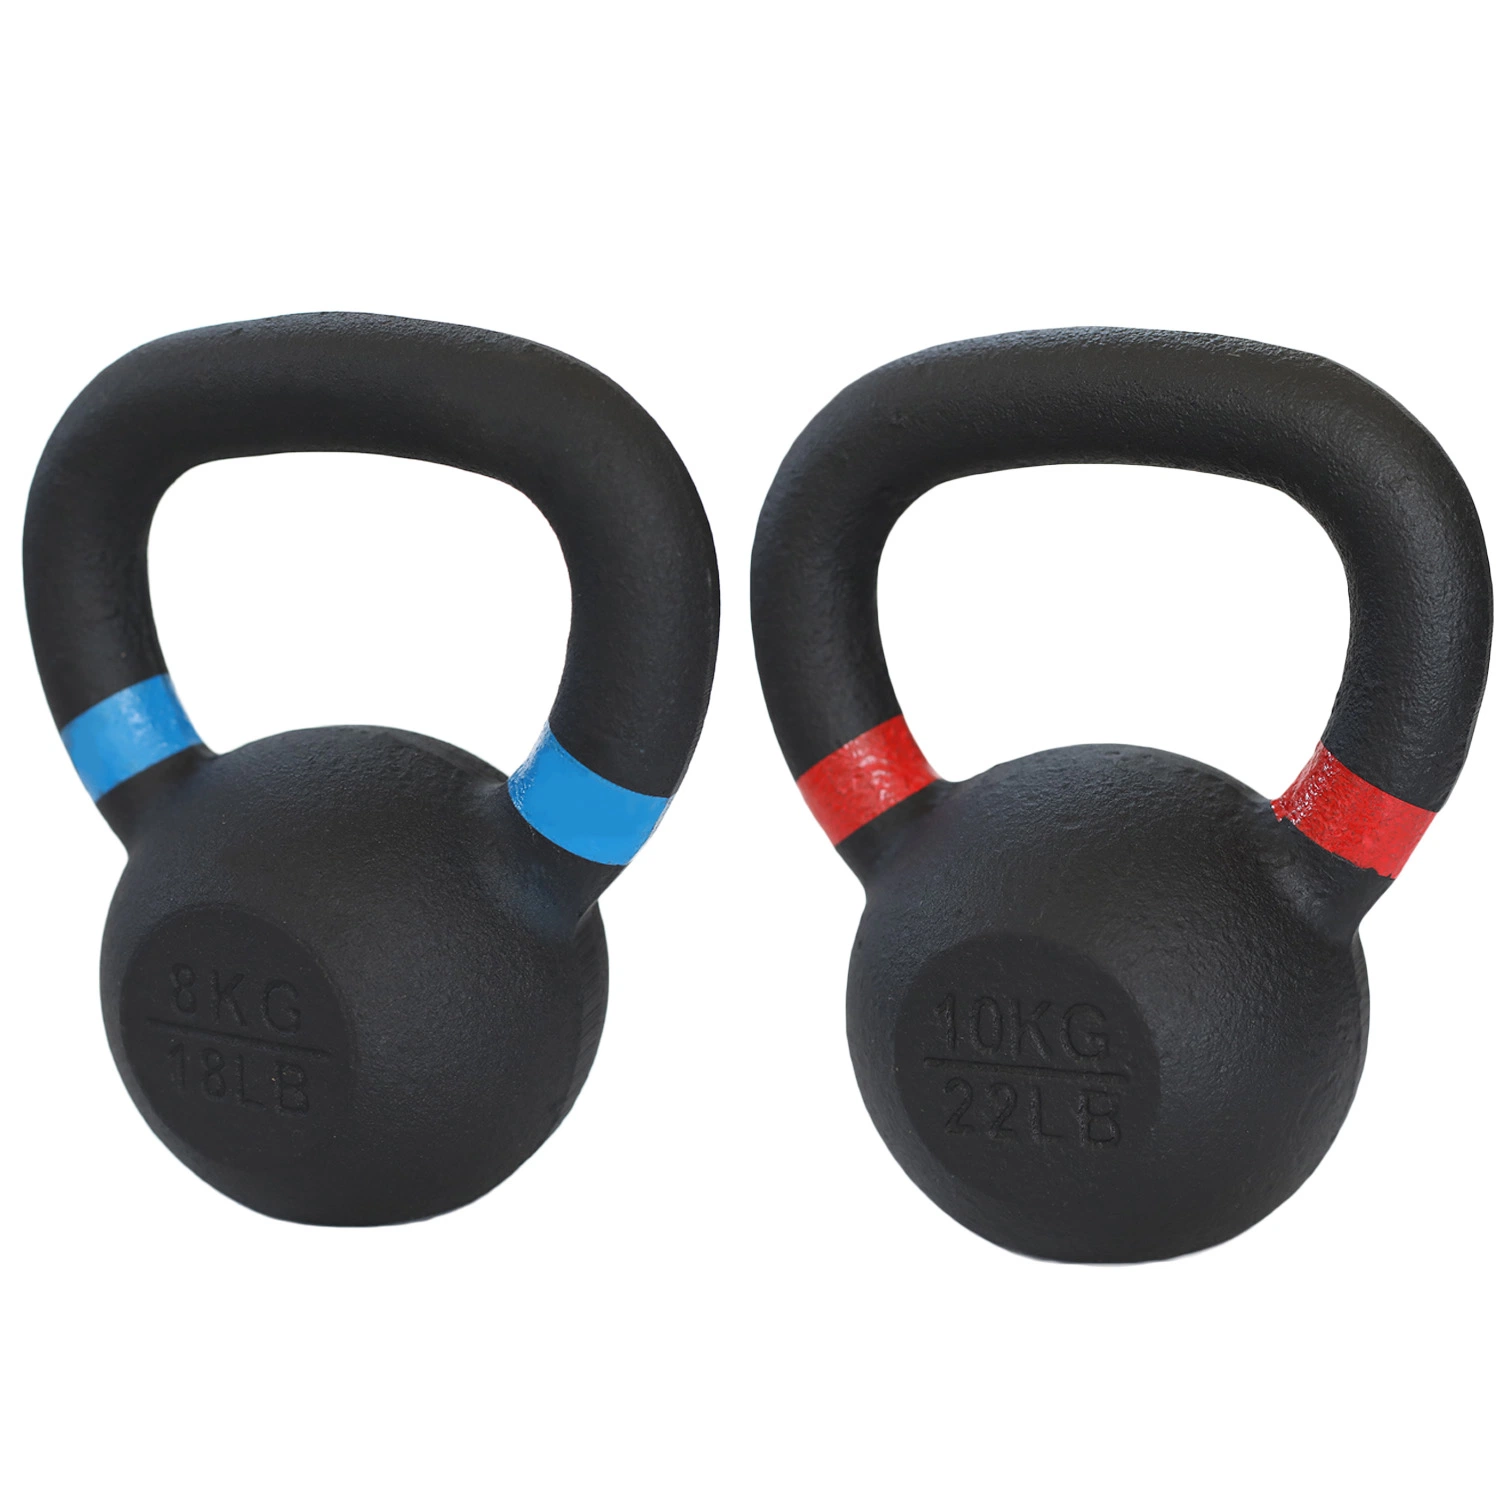 Gym Equipment Fitness Strength Manufacture Weight Lifting Black Dumbbells Kettlebell Home Gym Kettlebell Sets